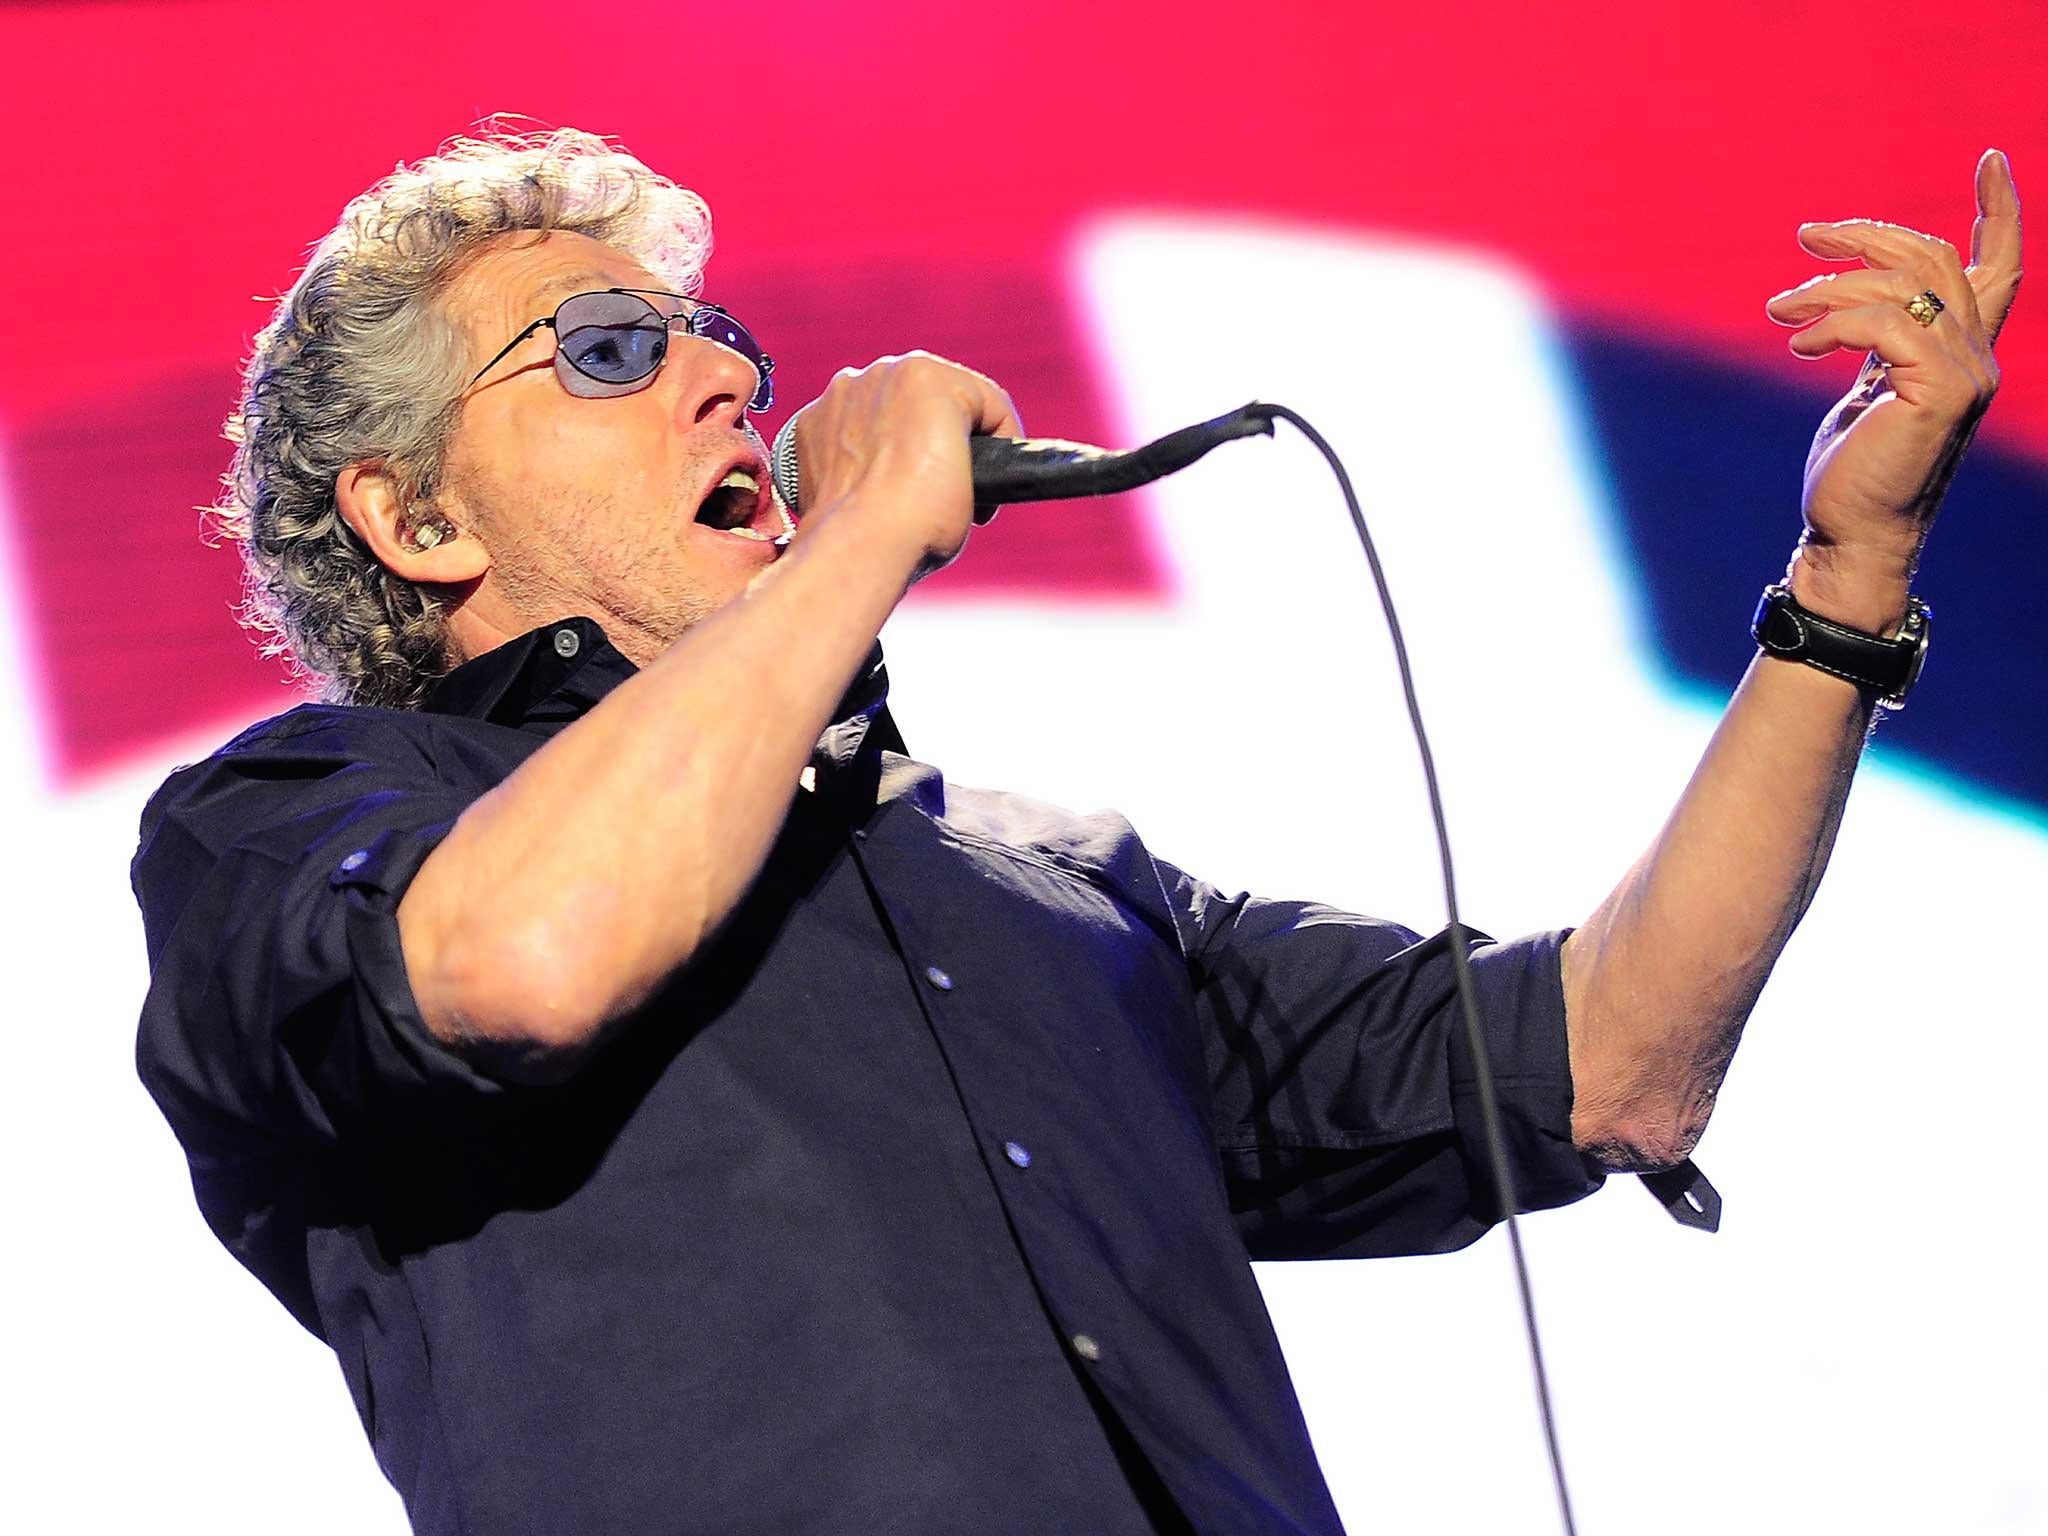 Roger Daltrey (left) and Pete Townsend of The Who at Glastonbury festival in 2015